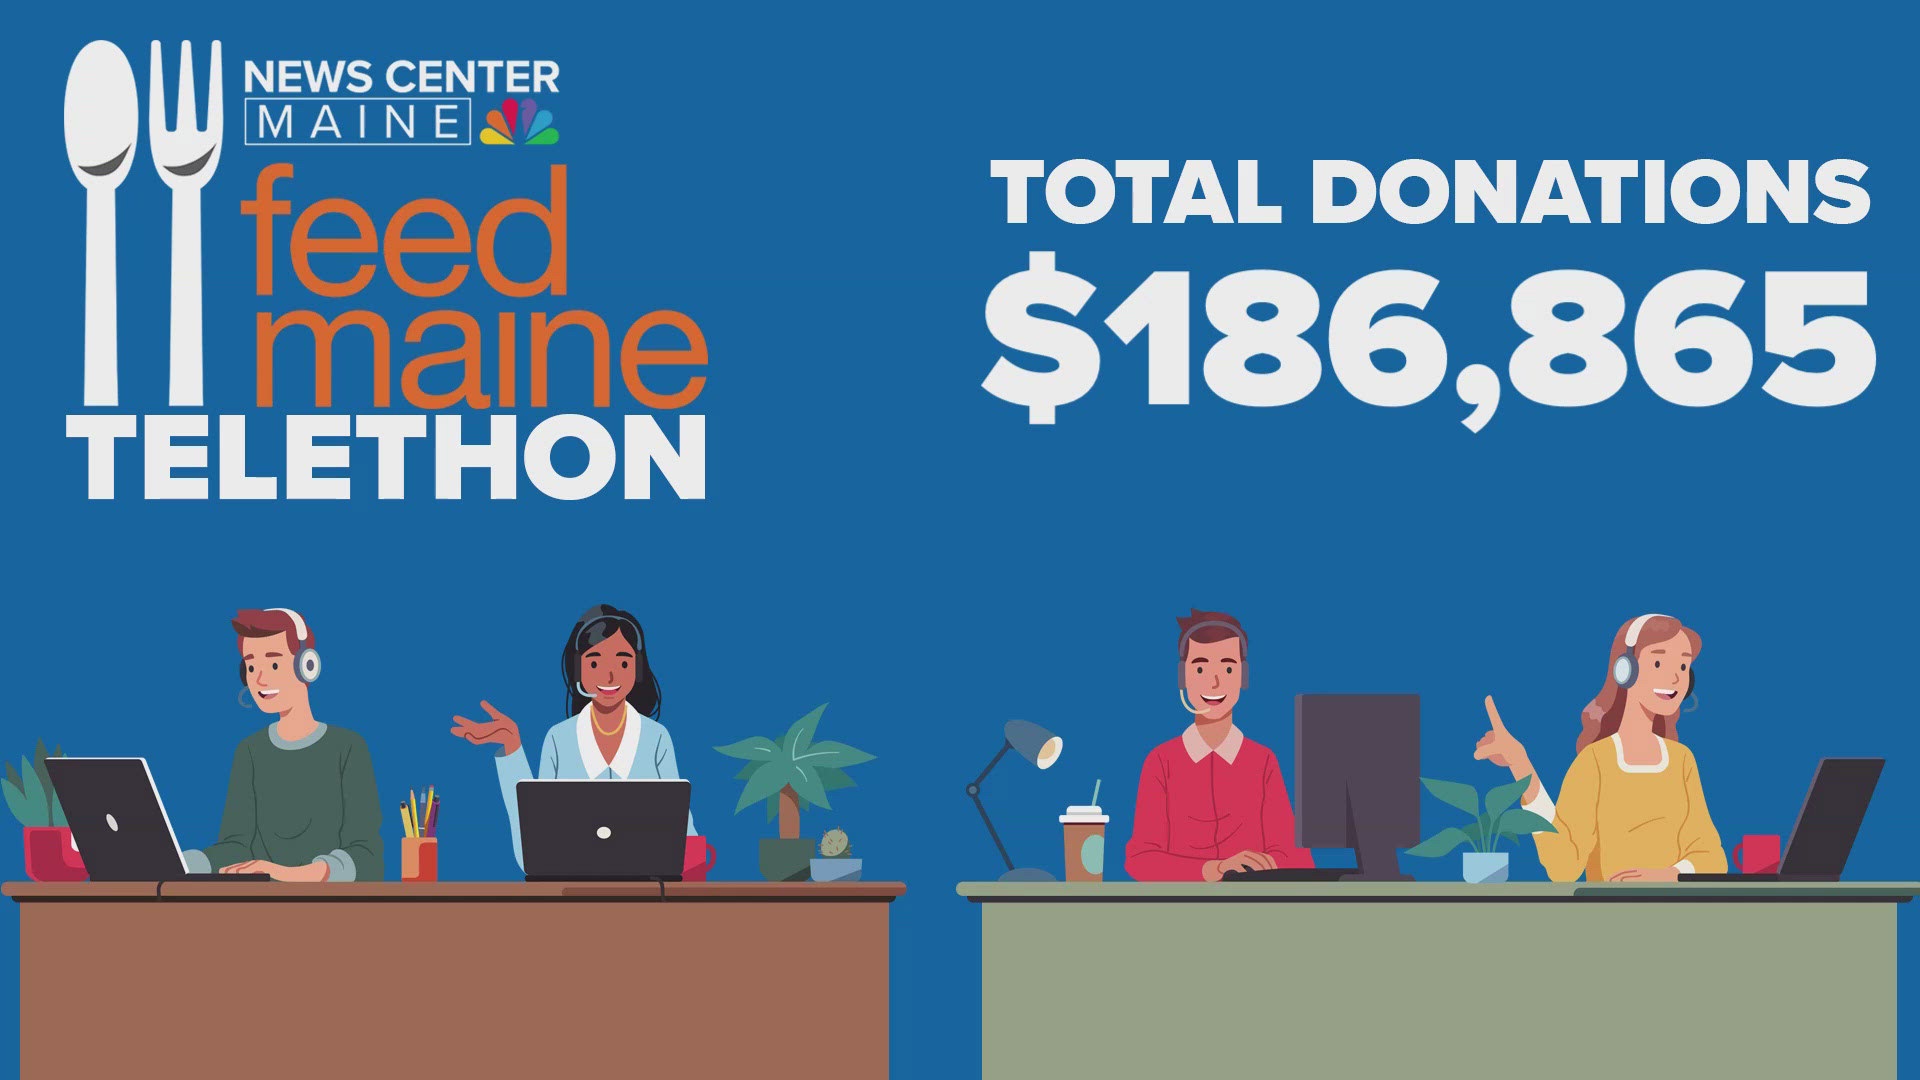 With your help, we were able to raise more than $186,000 from nearly 1,400 donors.